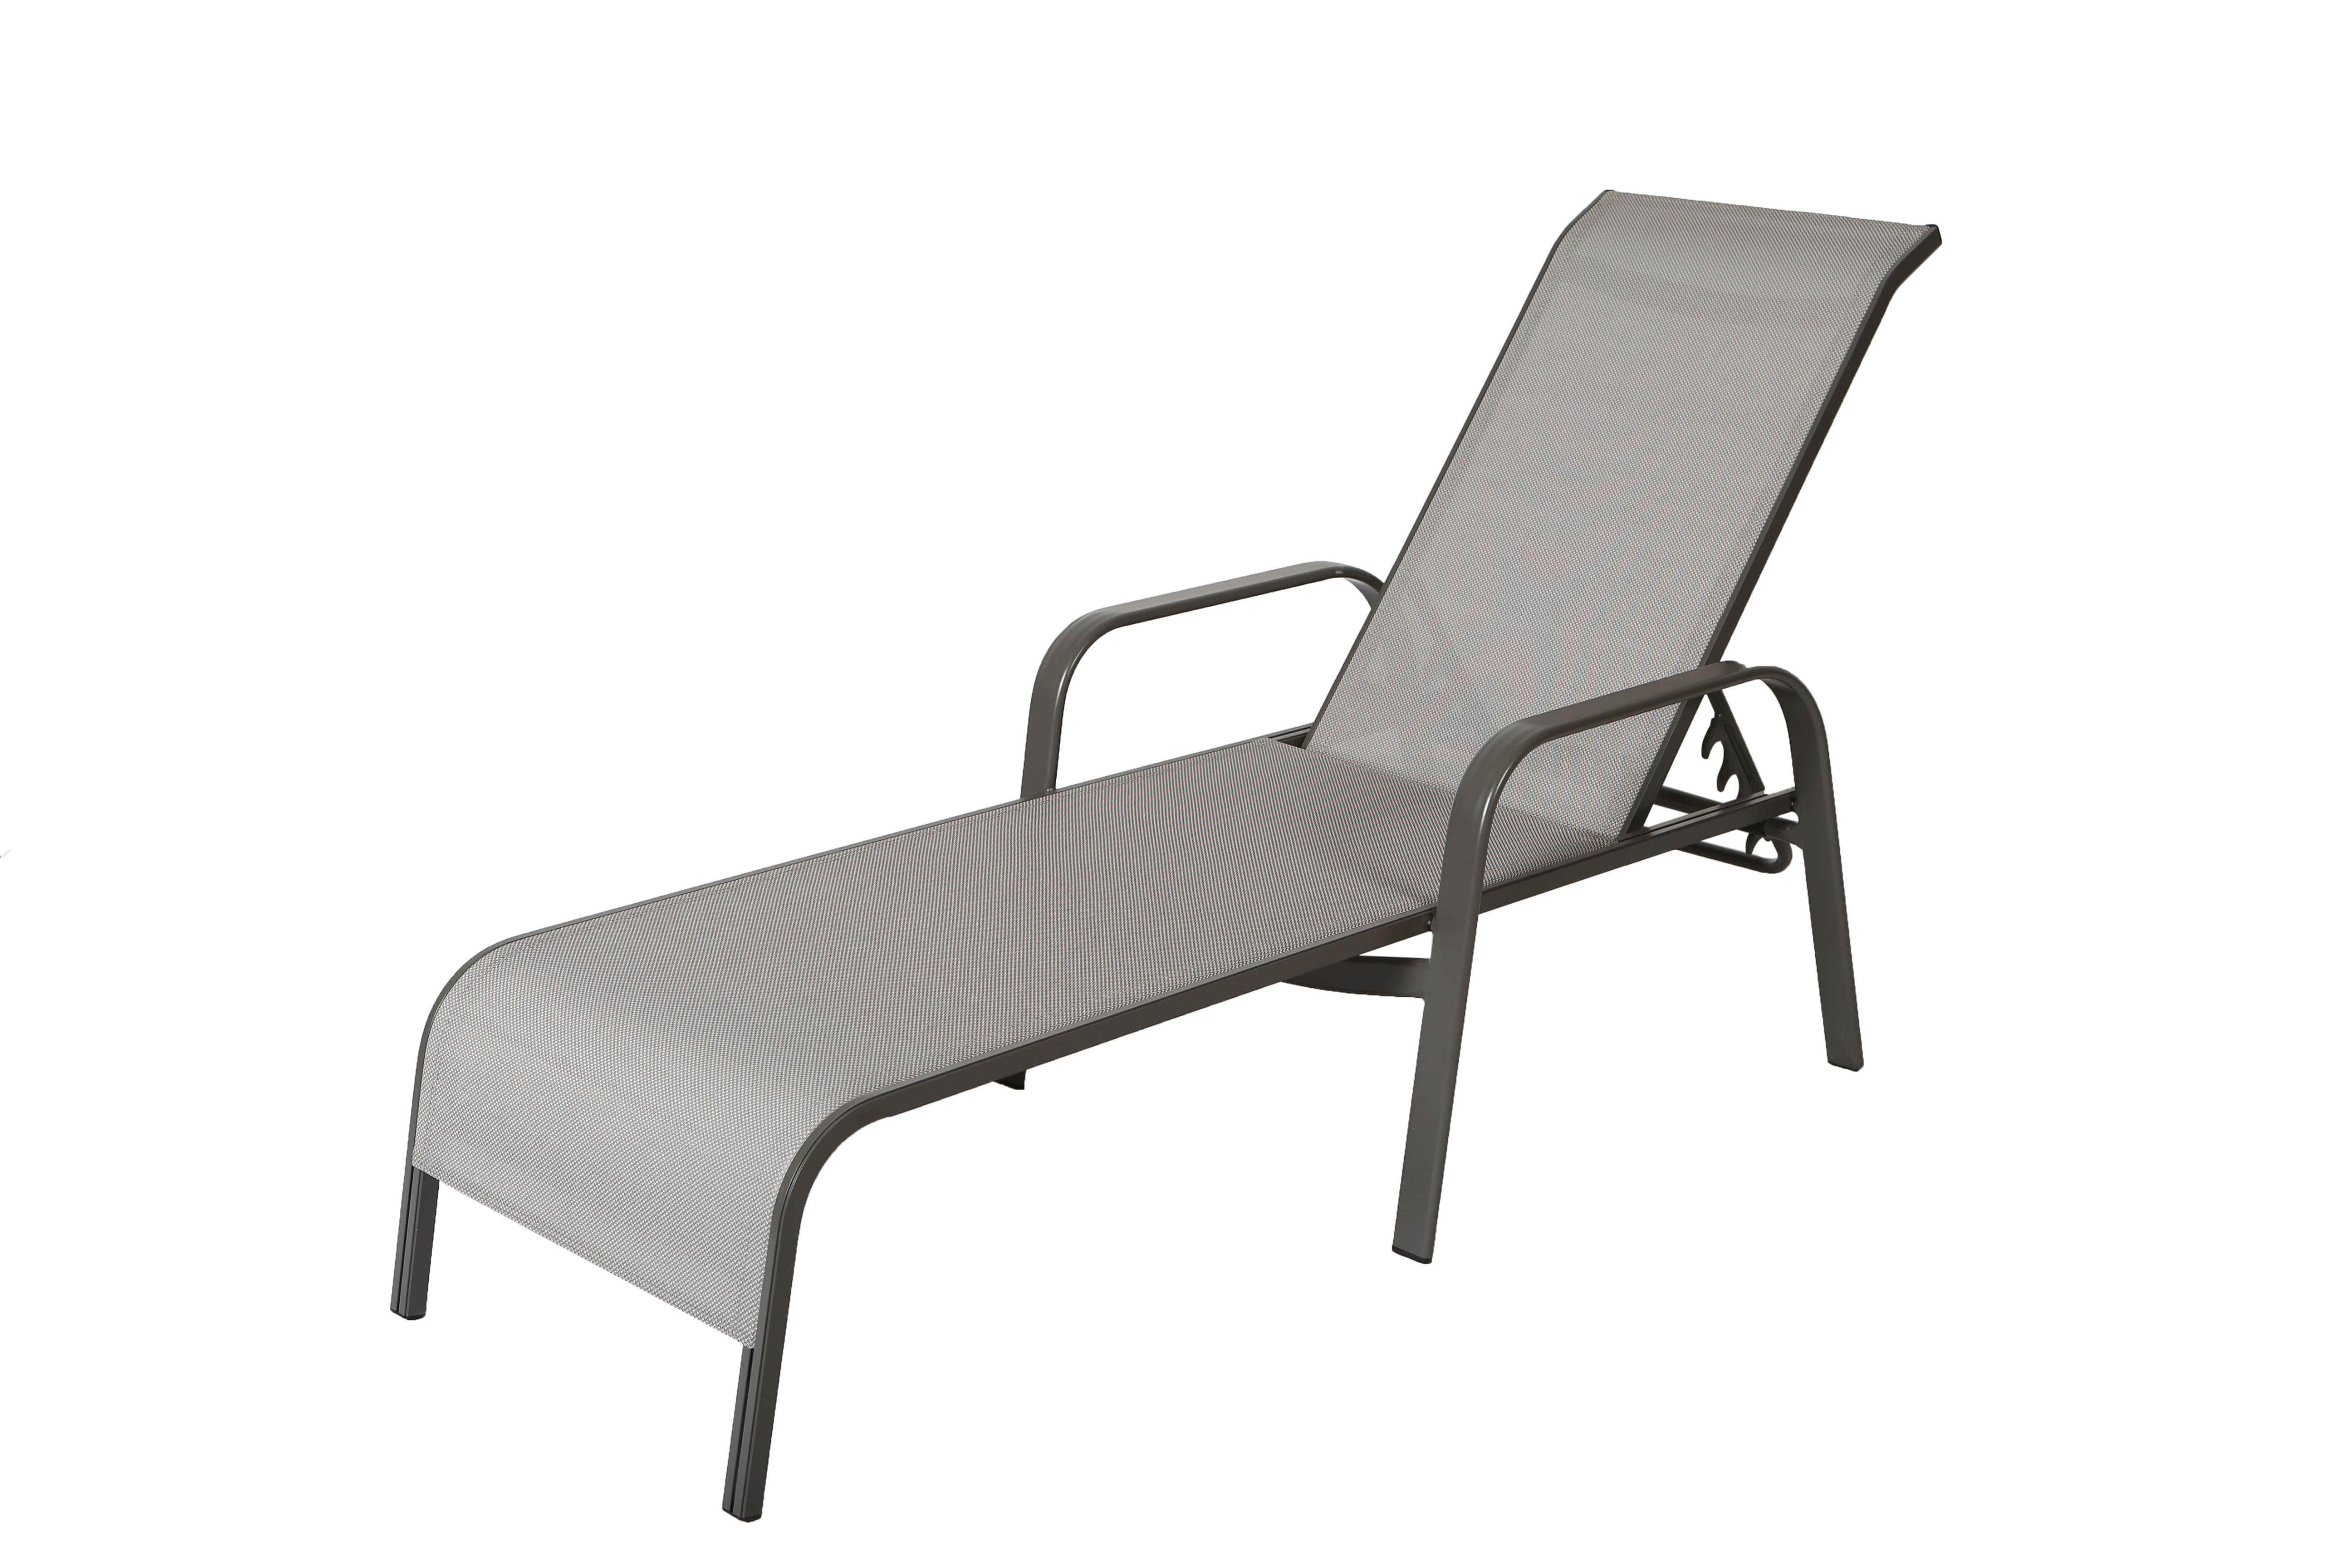 Lawton Casual Comfort Chaise Lounge Sling / Grey Lawton Casual Comfort - Commercial Chaise Lounge (Set of 4)